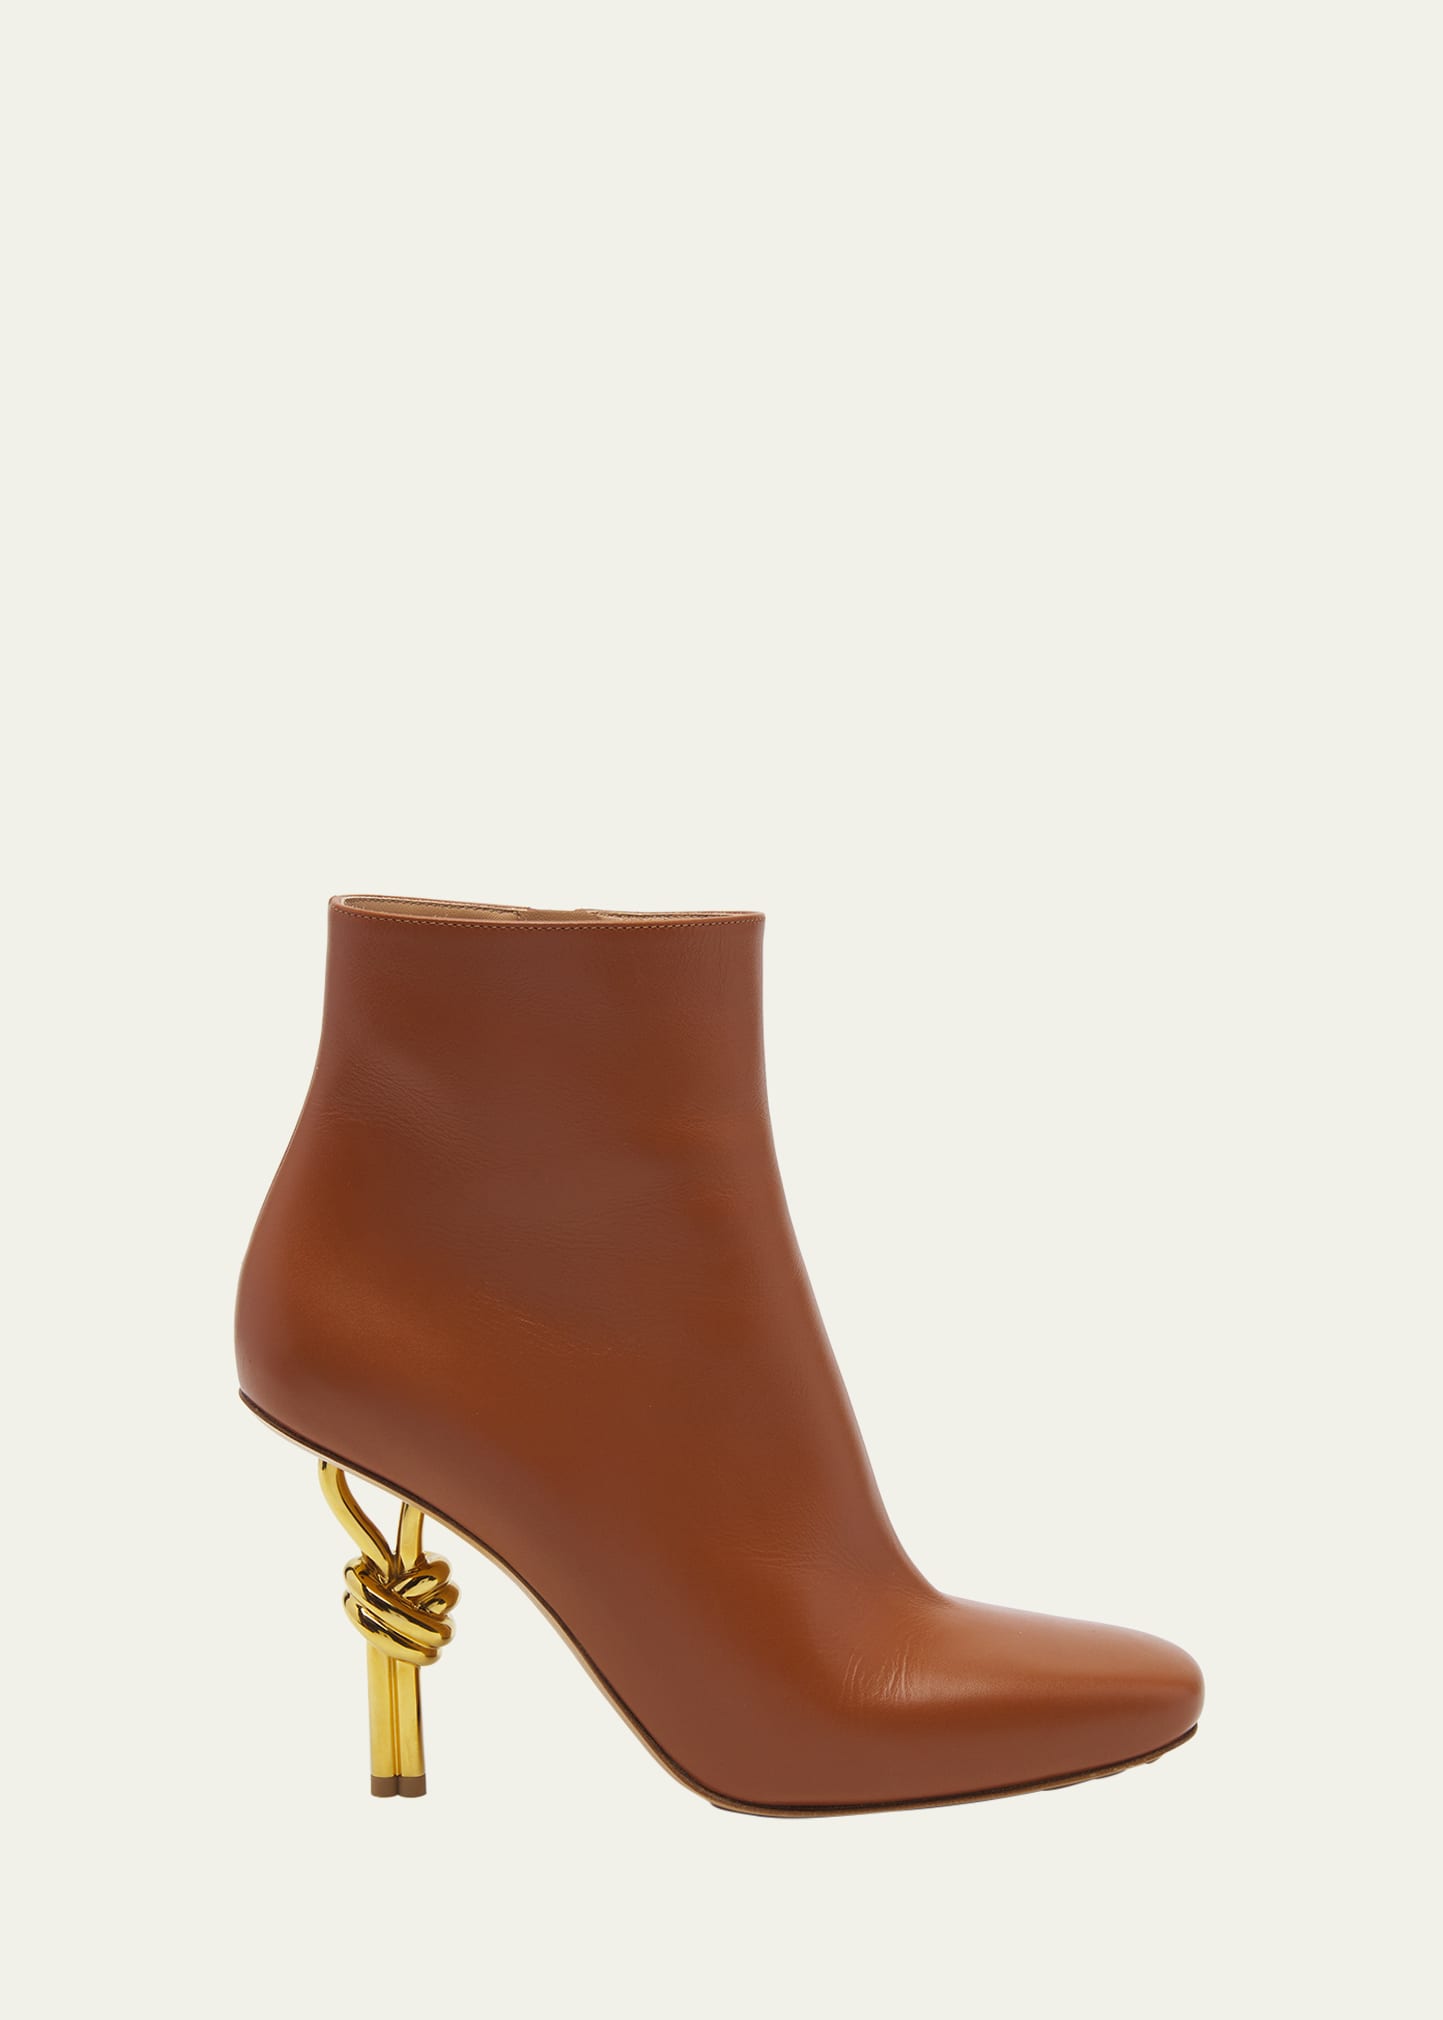 Leather Knot-Heel Ankle Boots